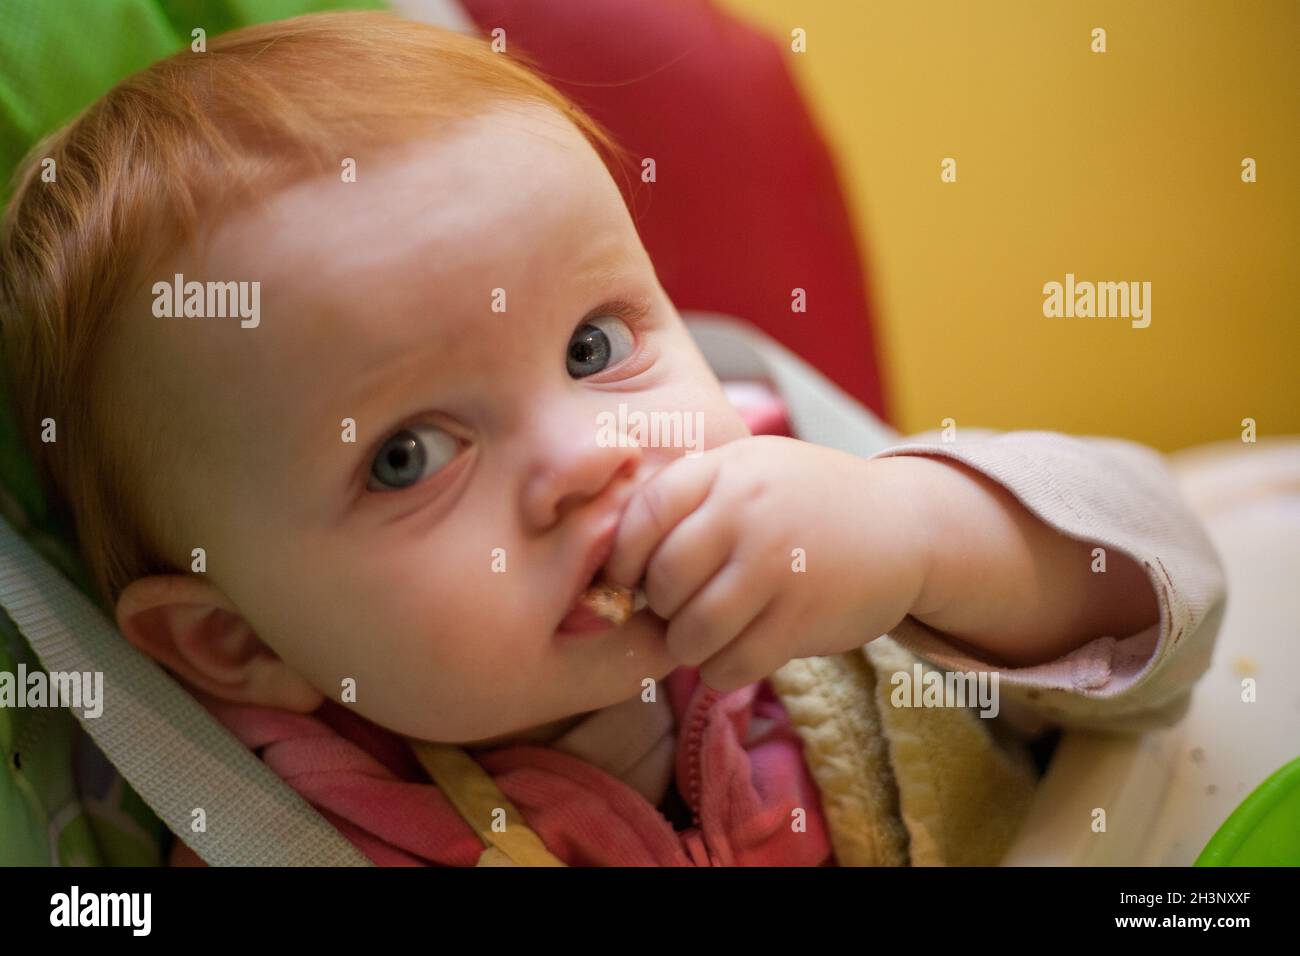 One year old baby girl chocolate cake smash party Stock Photo